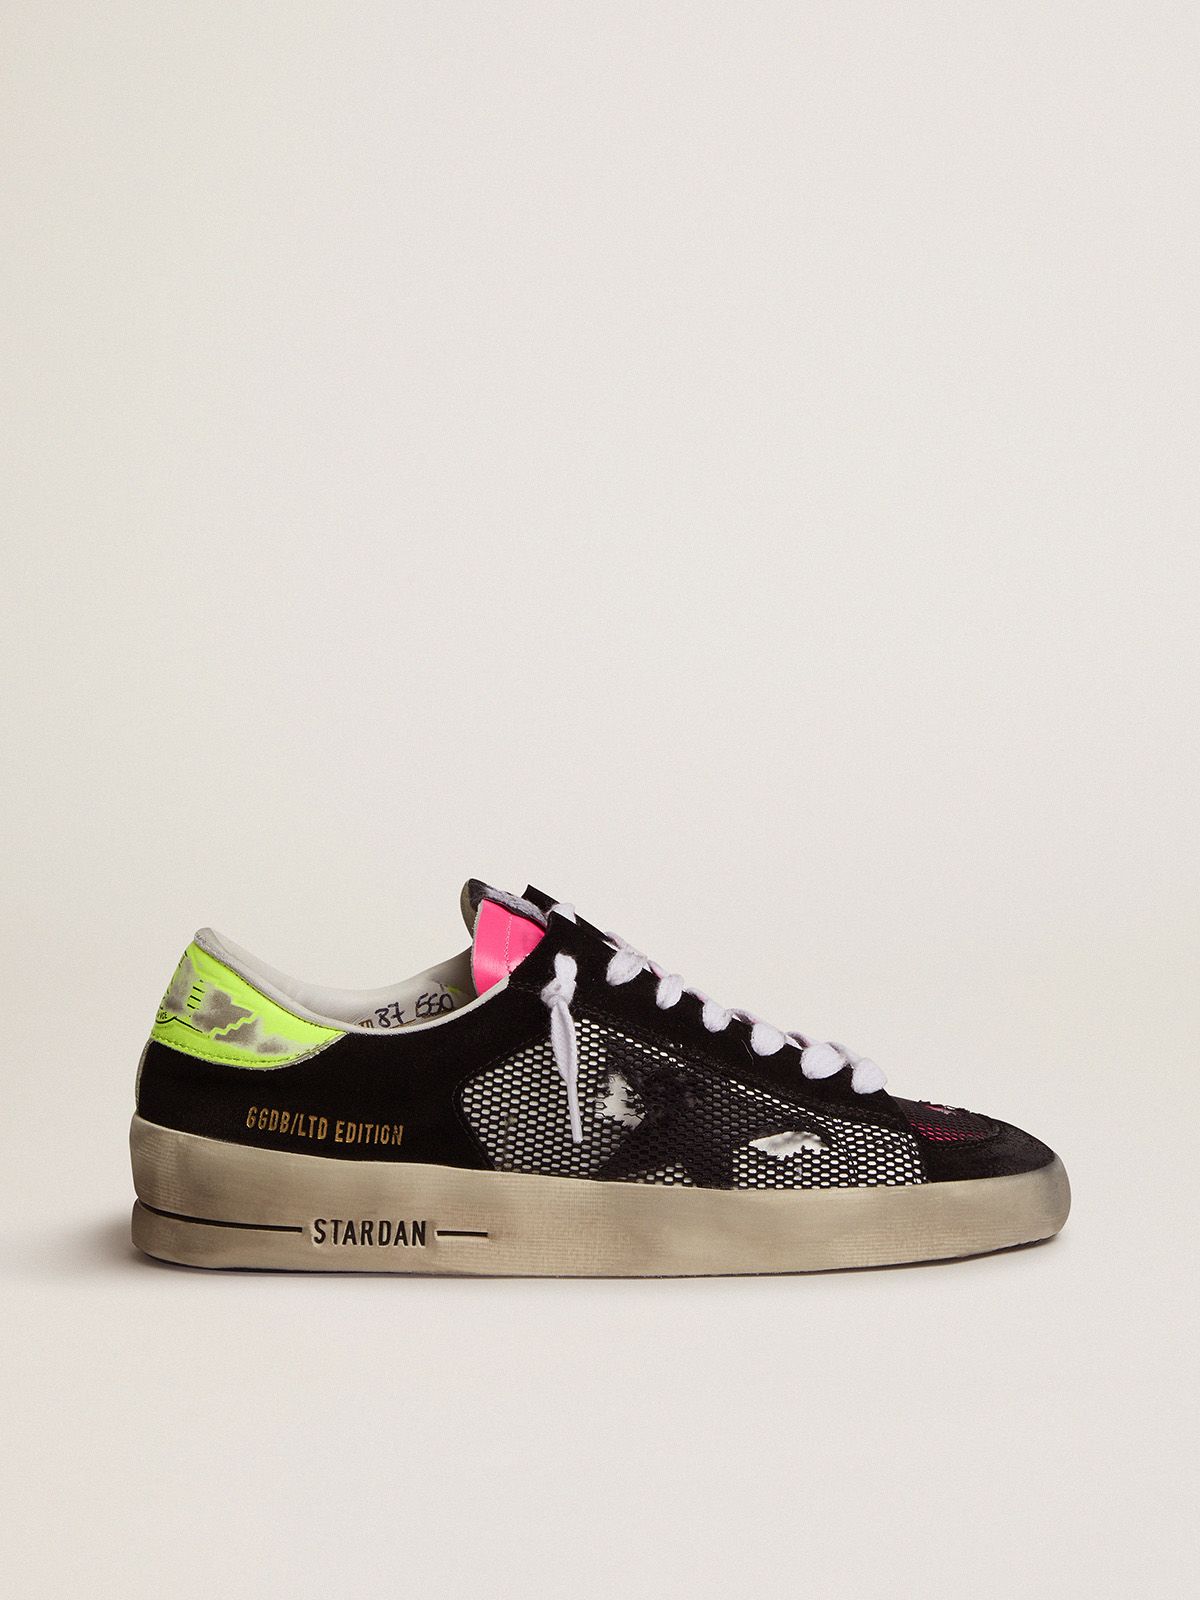 golden goose Stardan yellow Women’s fuchsia sneakers Edition in and Limited